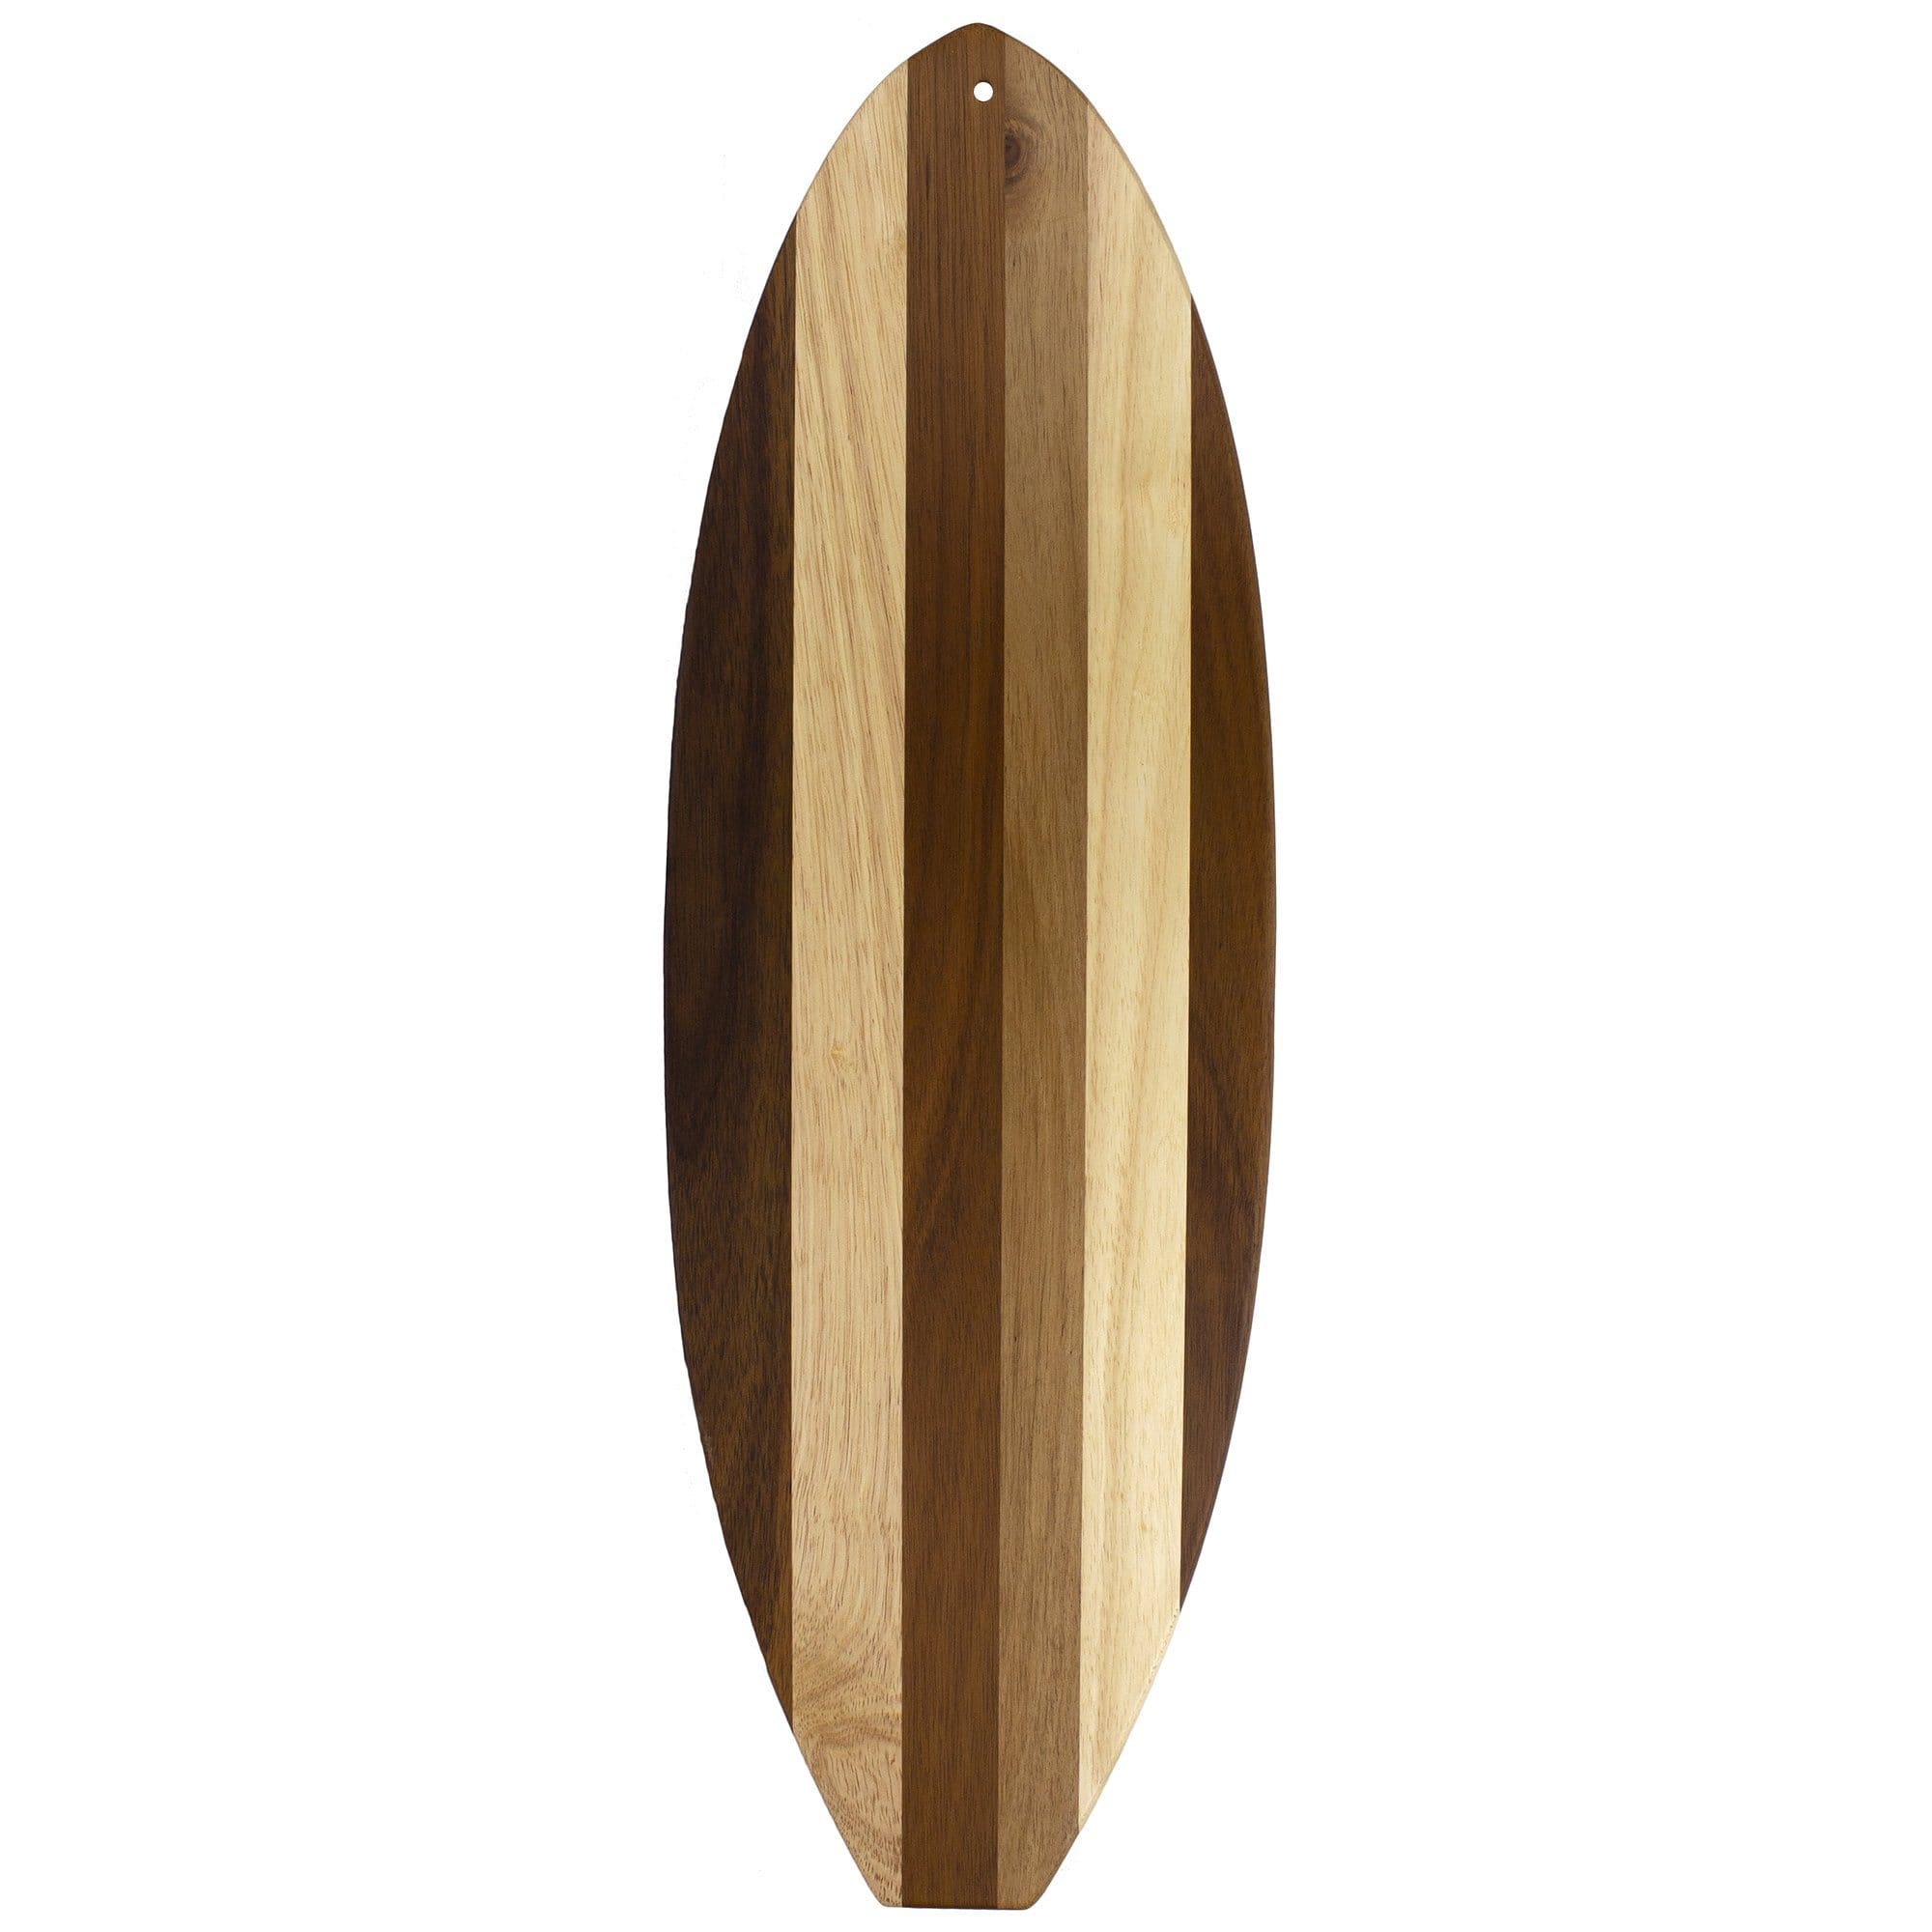 https://totallybamboo.com/cdn/shop/products/rock-branchr-shiplap-series-surfboard-shaped-wood-serving-and-cutting-board-totally-bamboo-143640.jpg?v=1628150882